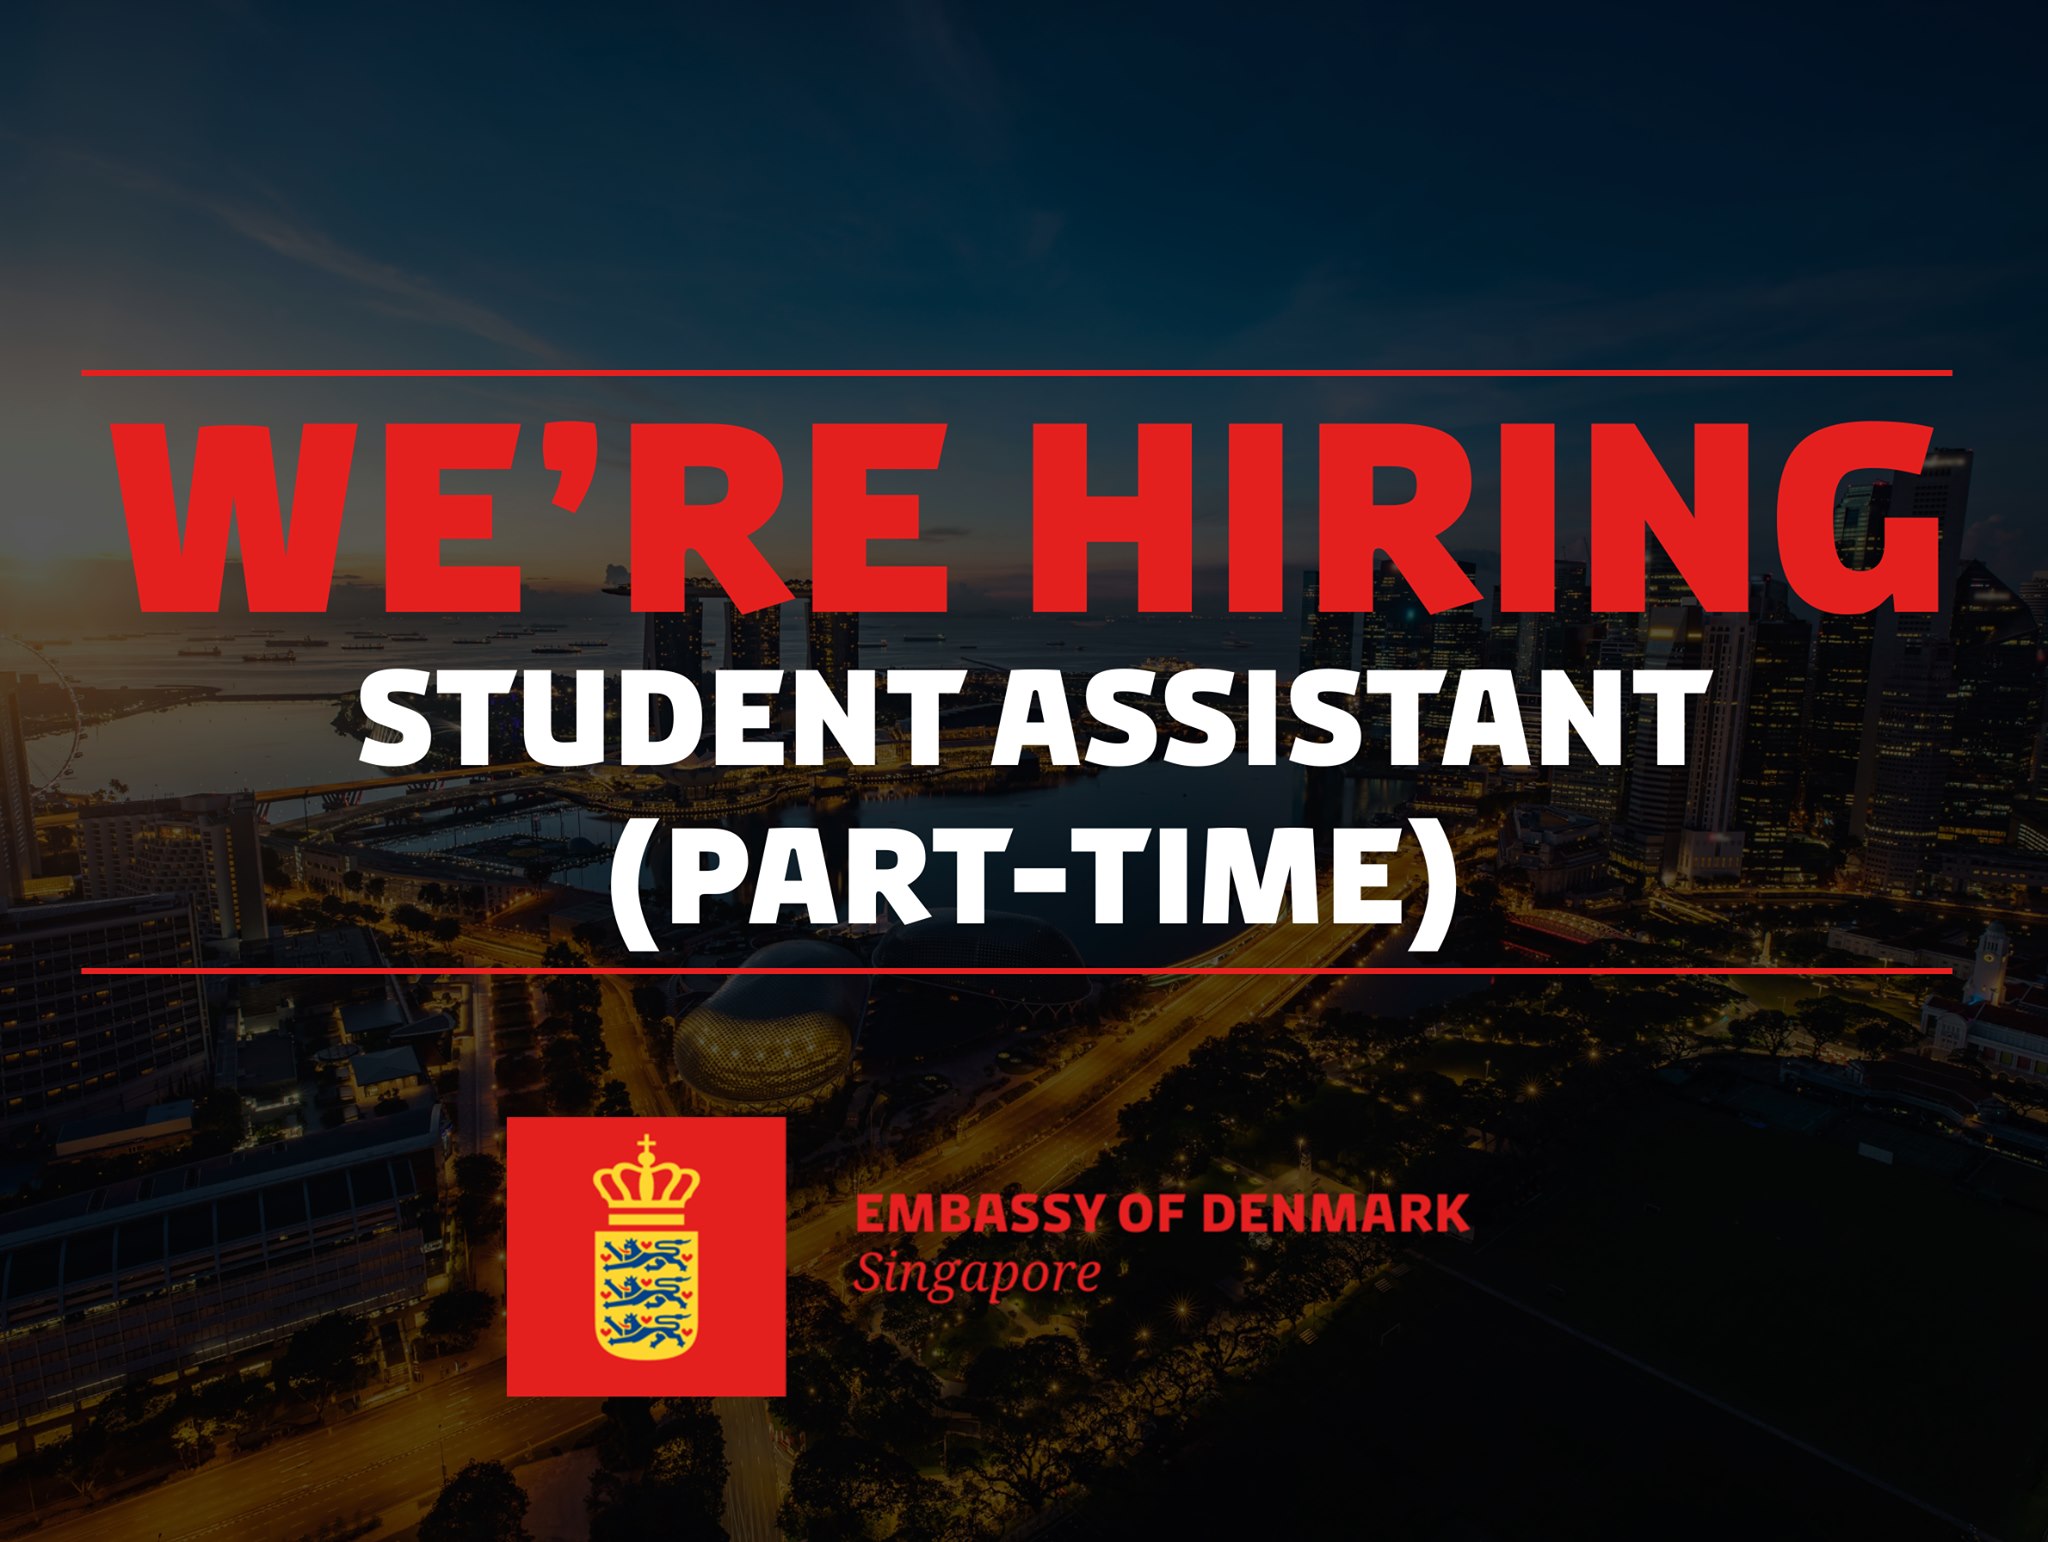 Danish Embassy Singapore's Trade Department is looking for a student assistant